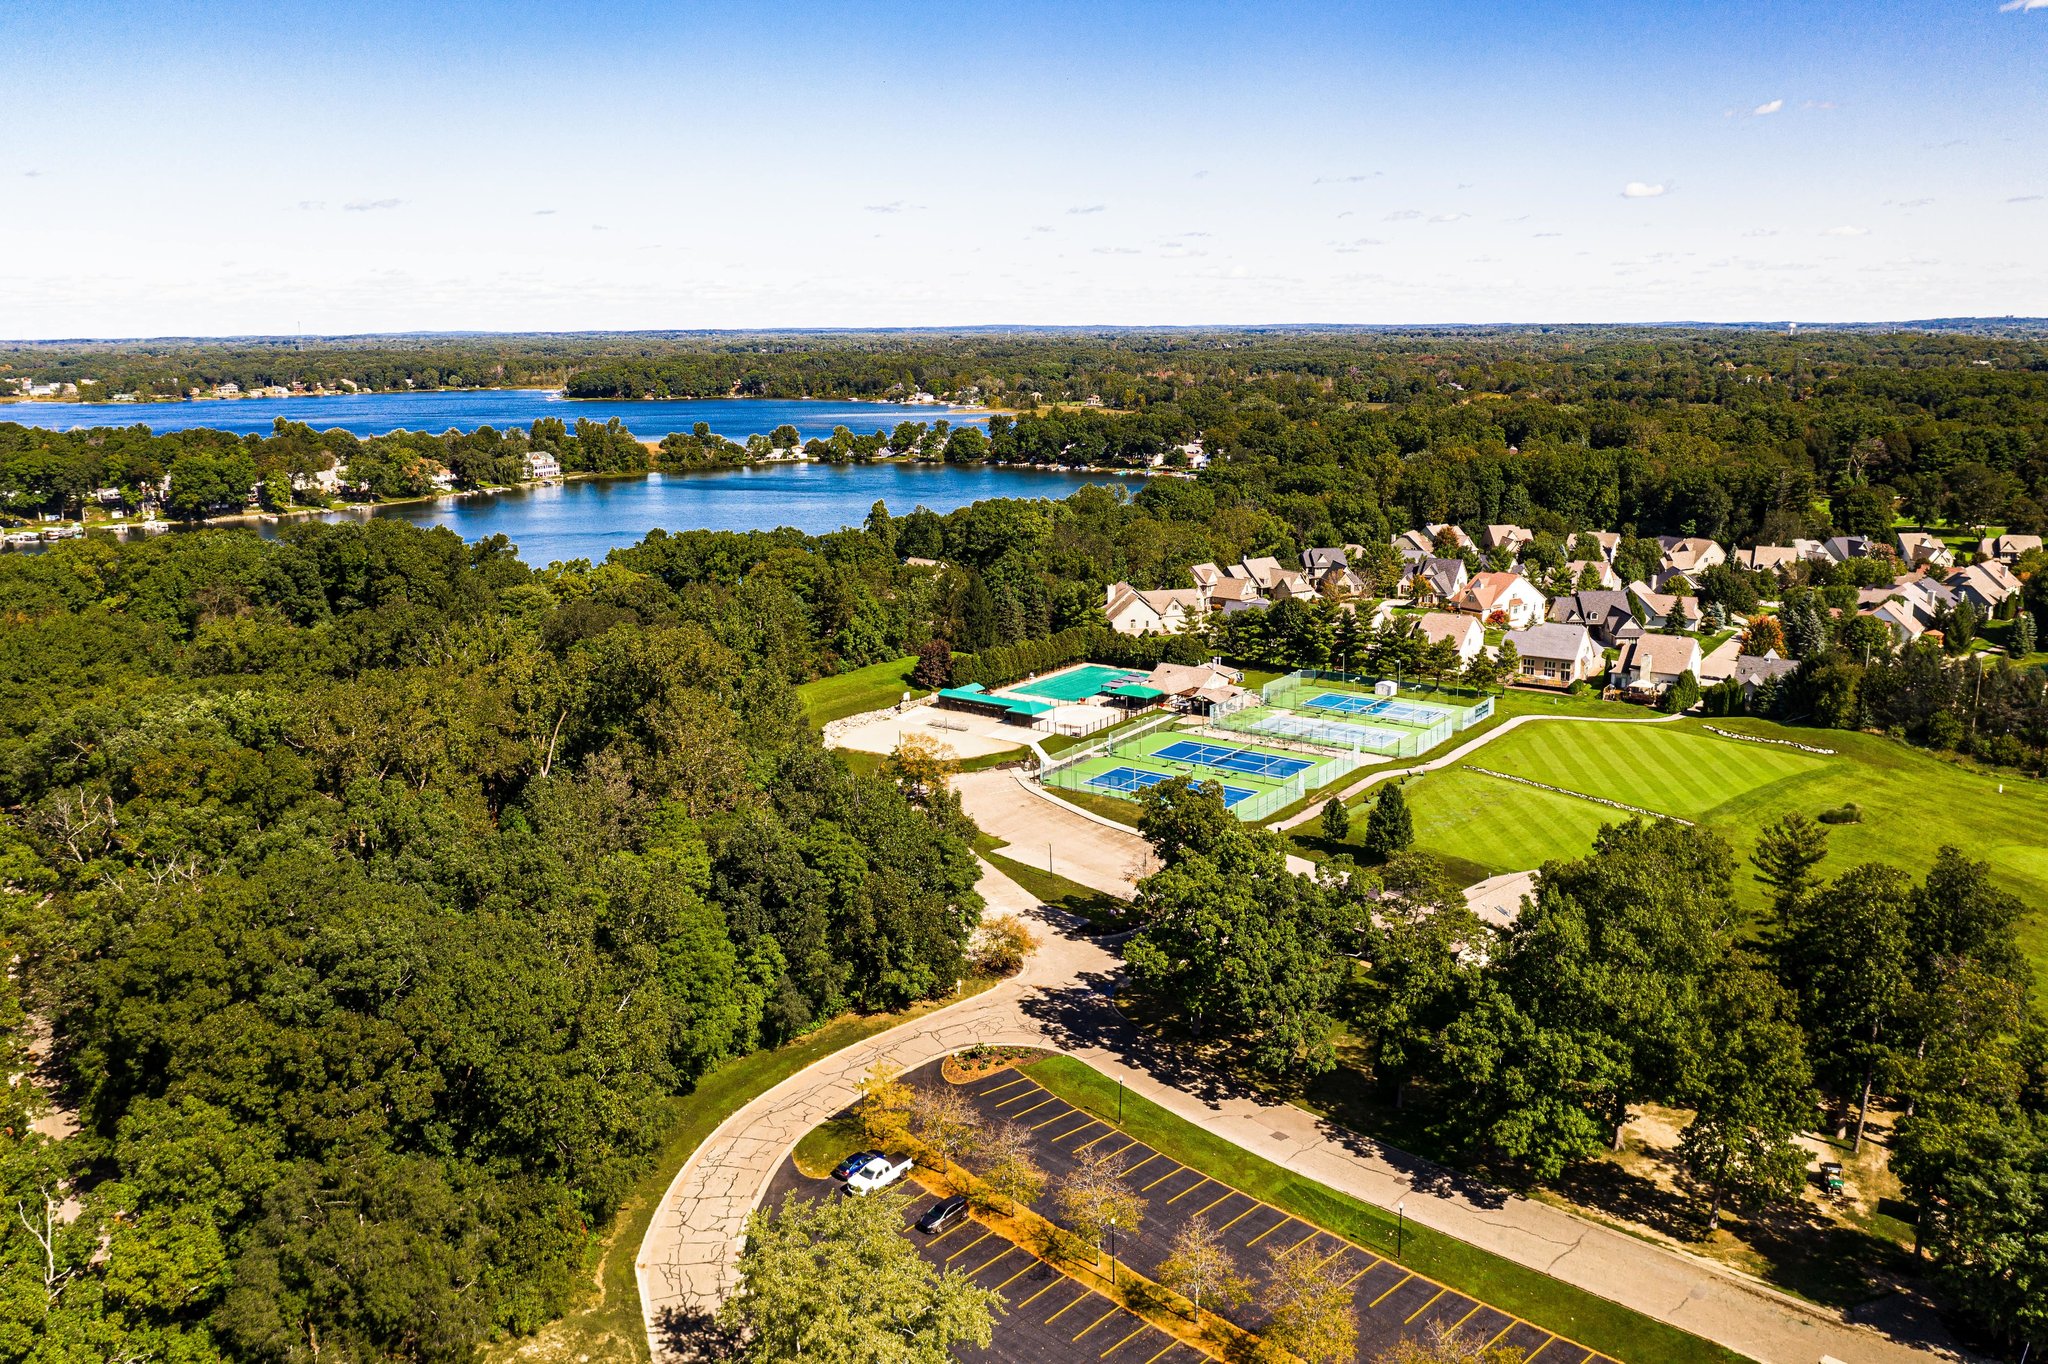 Aerial view of the tennis court and pools at Oak Pointe